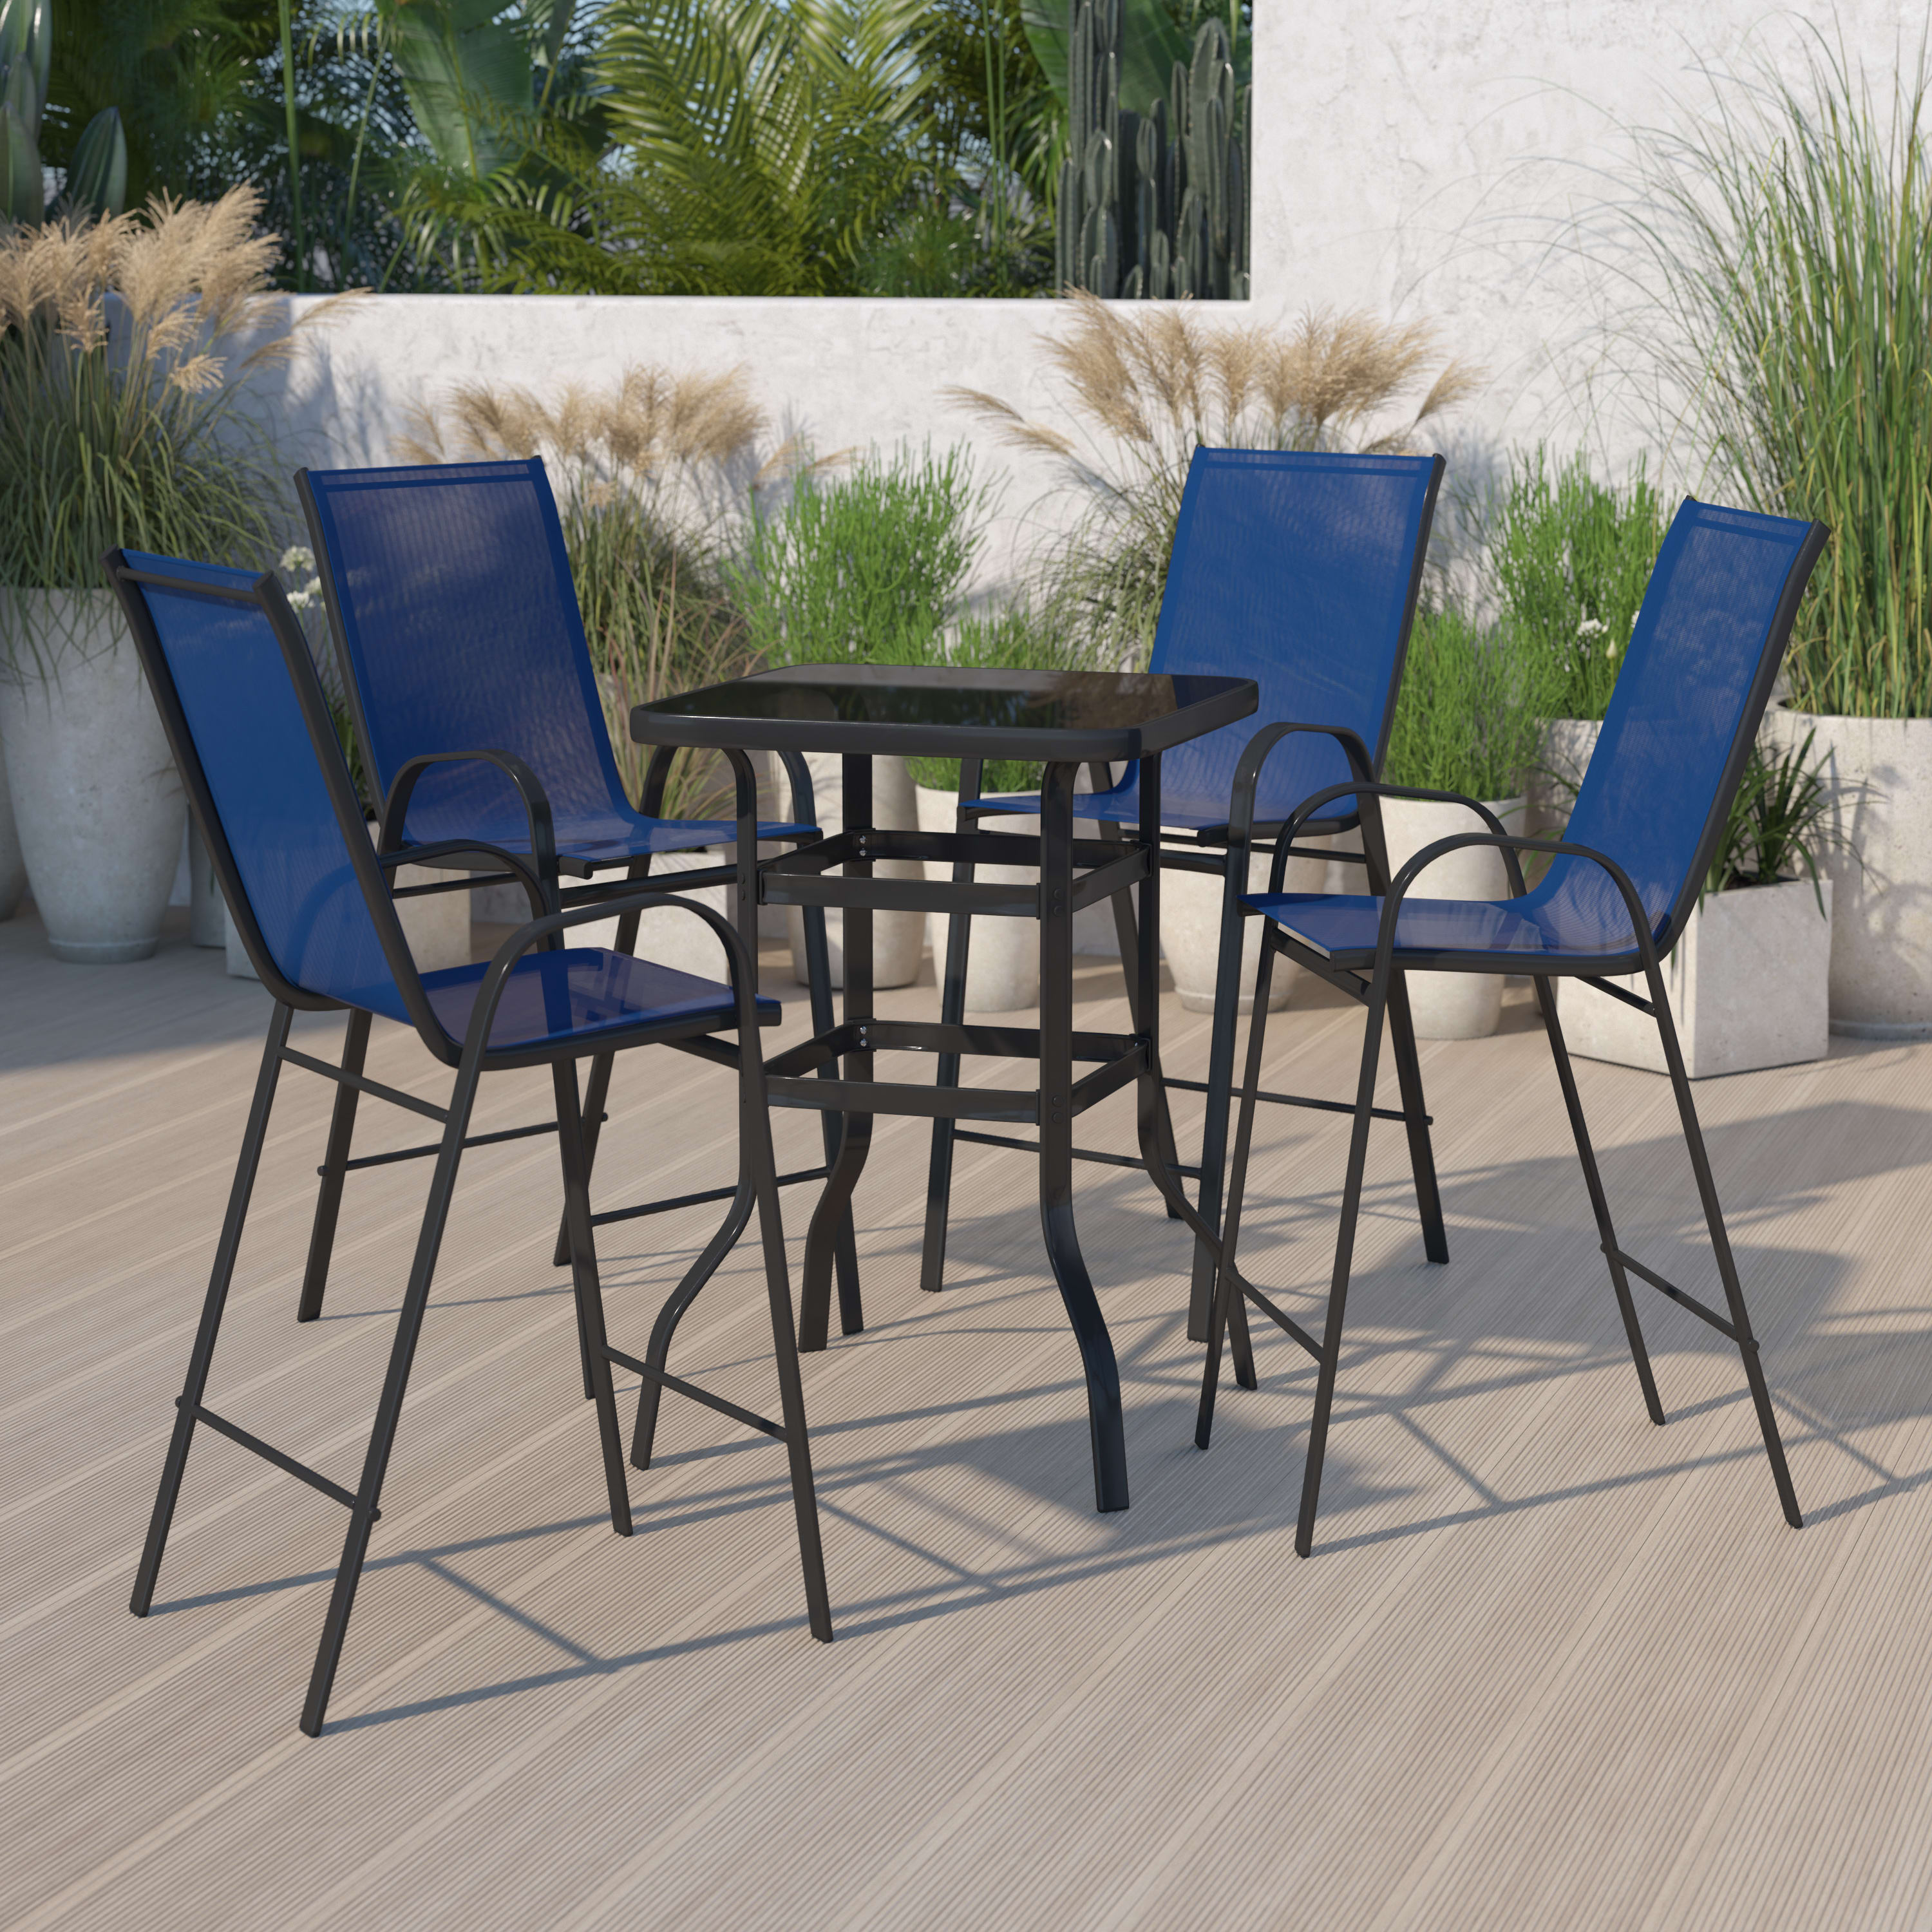 Brazos Outdoor Dining Set - 4-Person Bistro Set - Outdoor Glass Bar Table with All-Weather Patio Stools